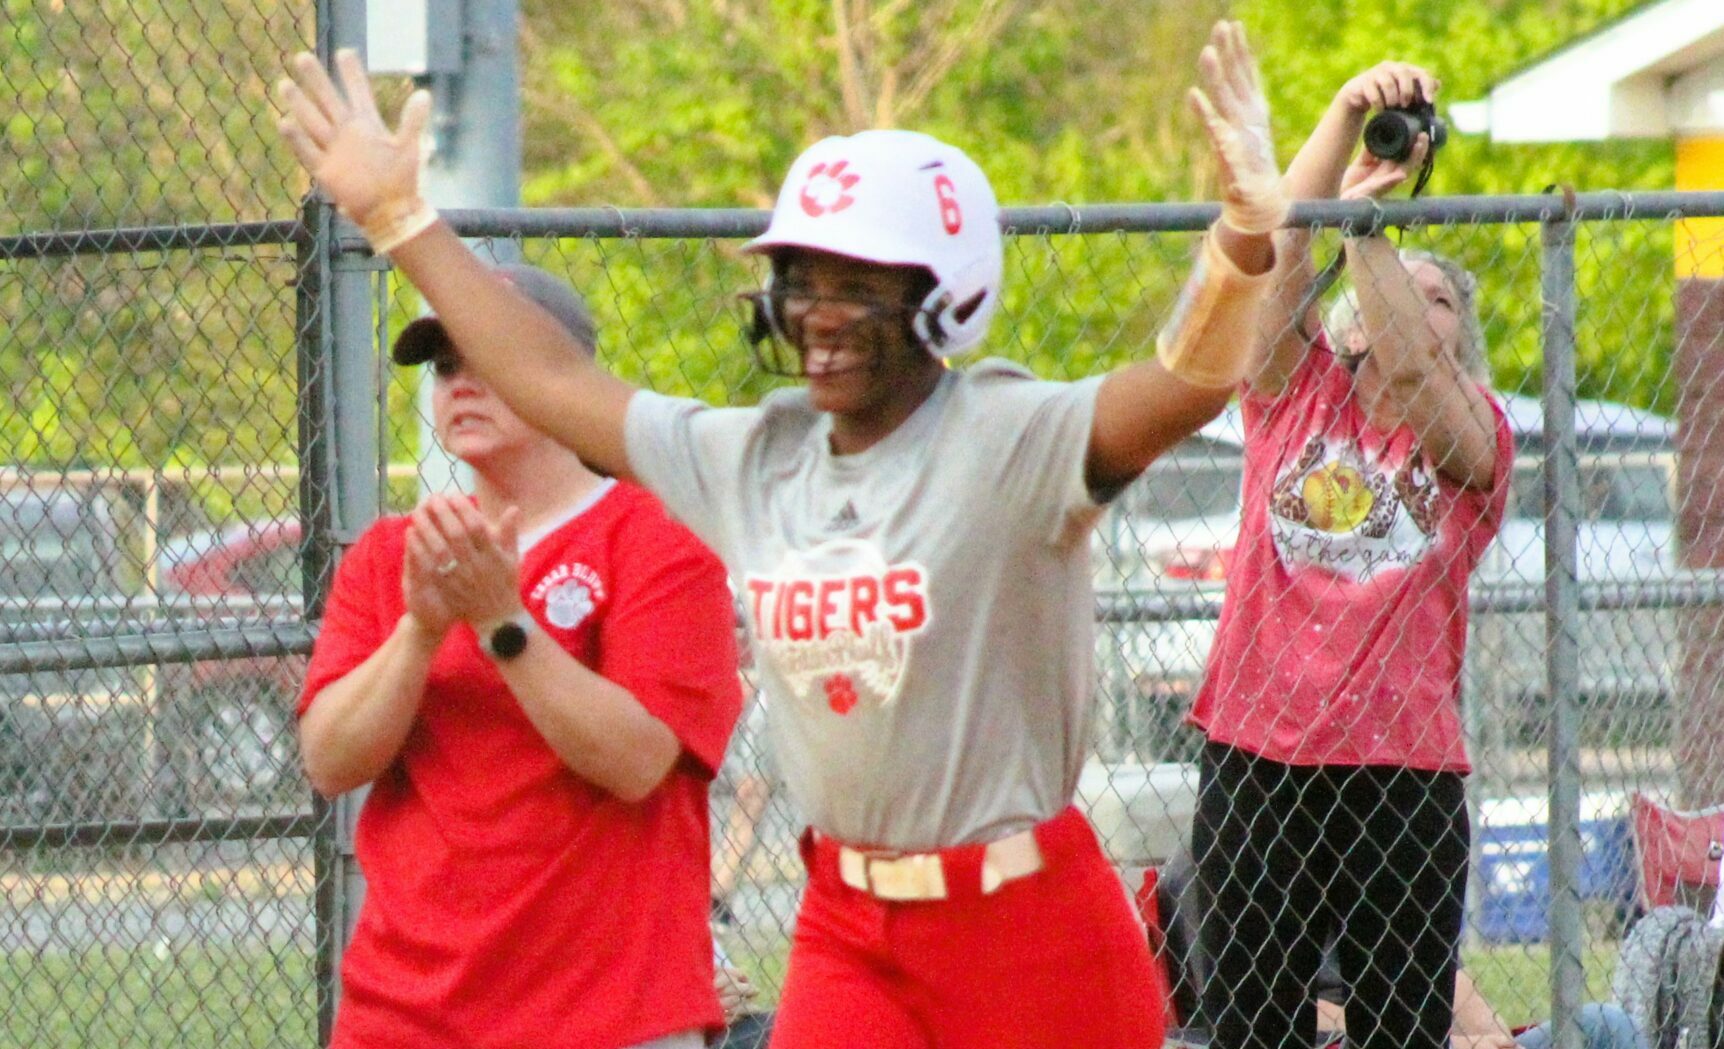 Cedar Bluff’s Kyle, Spring Garden’s Word deliver walk-off hits in Class 1A, Area 11 softball tournament